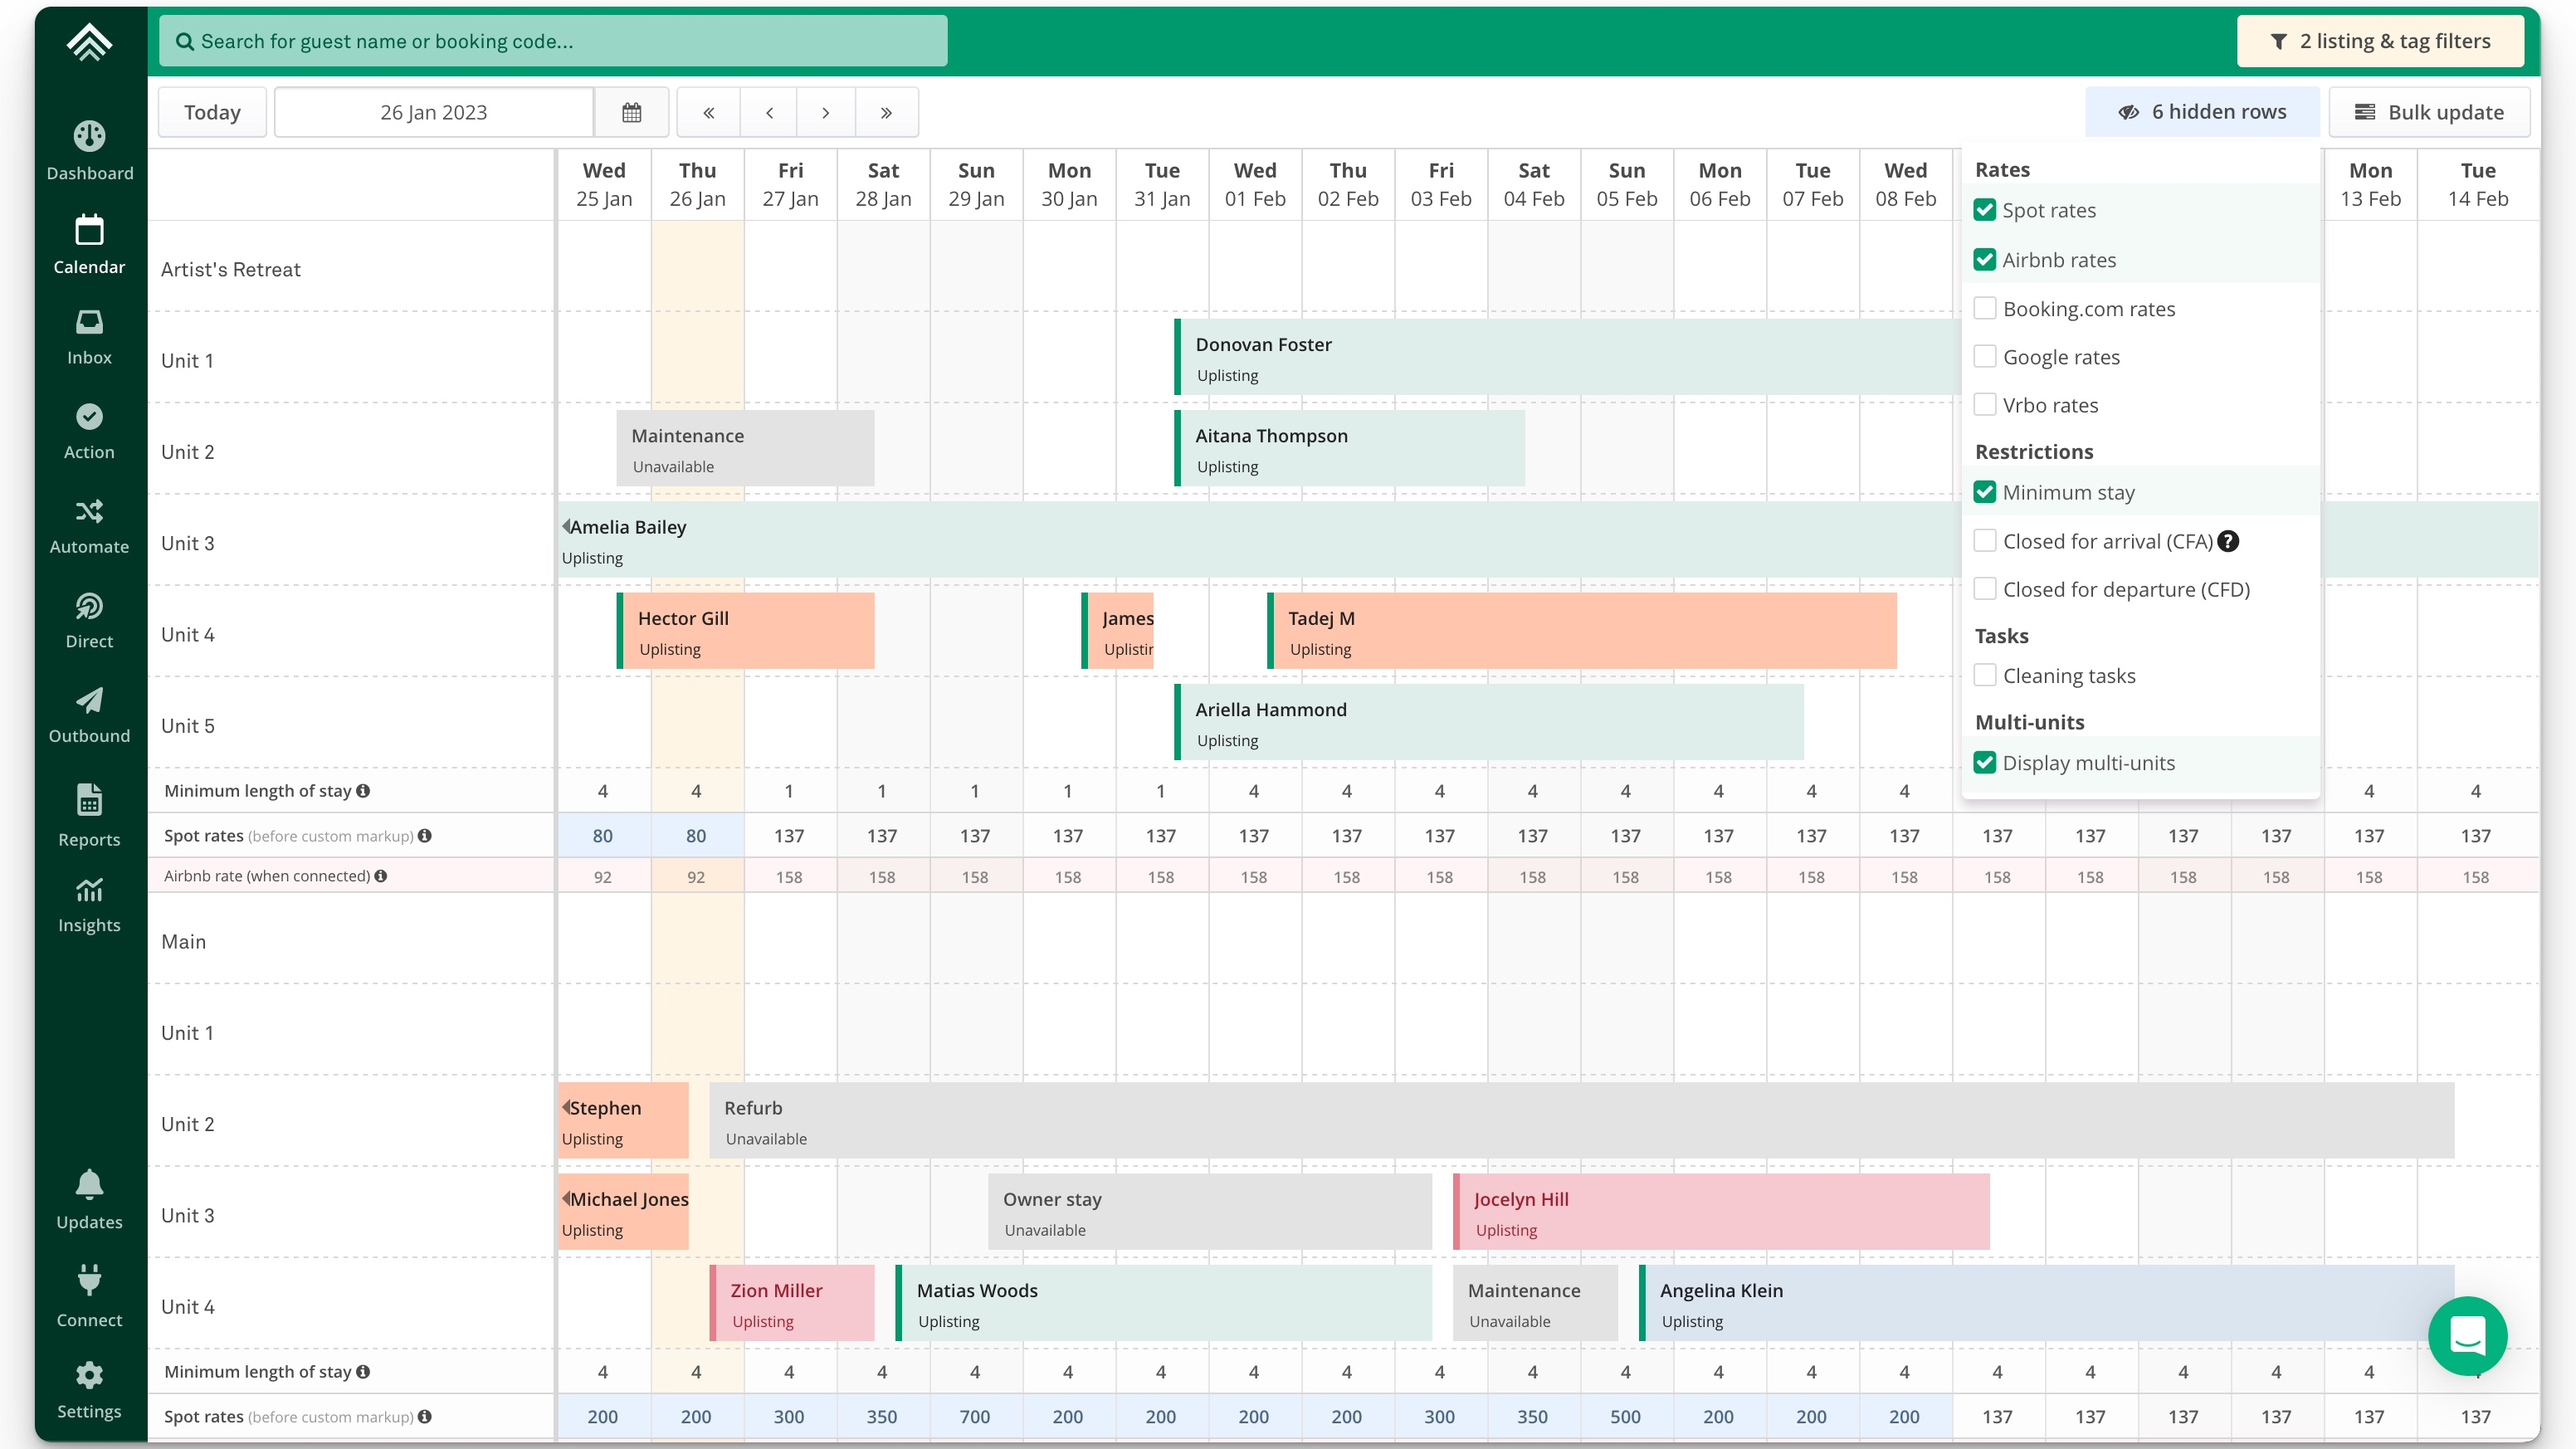 Calendar: Manage bookings, prices, availability and restrictions such as minimum stay and closed for arrival for all booking sites in one central calendar.